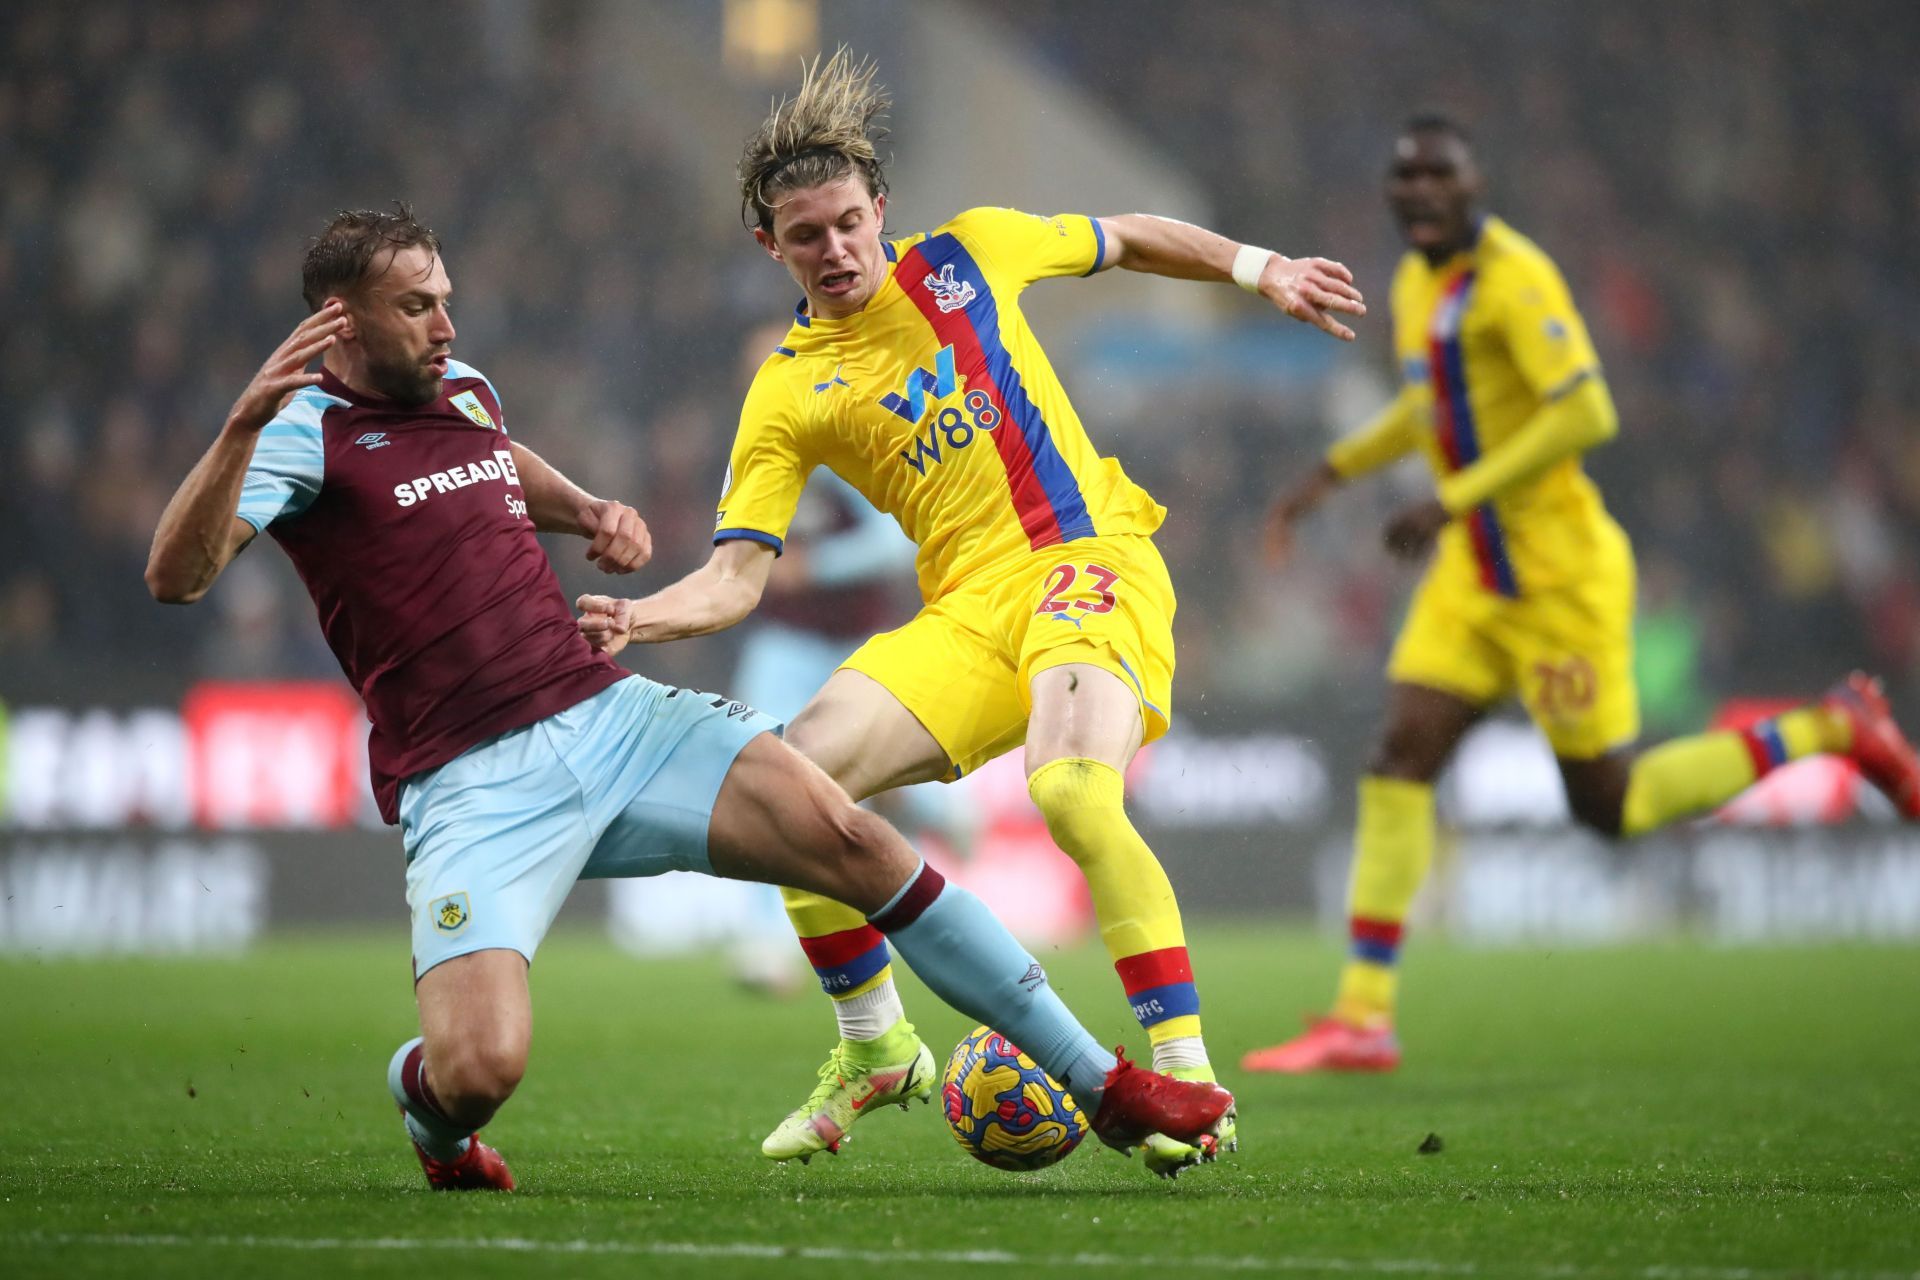 Gallagher has been superb for Crystal Palace this season